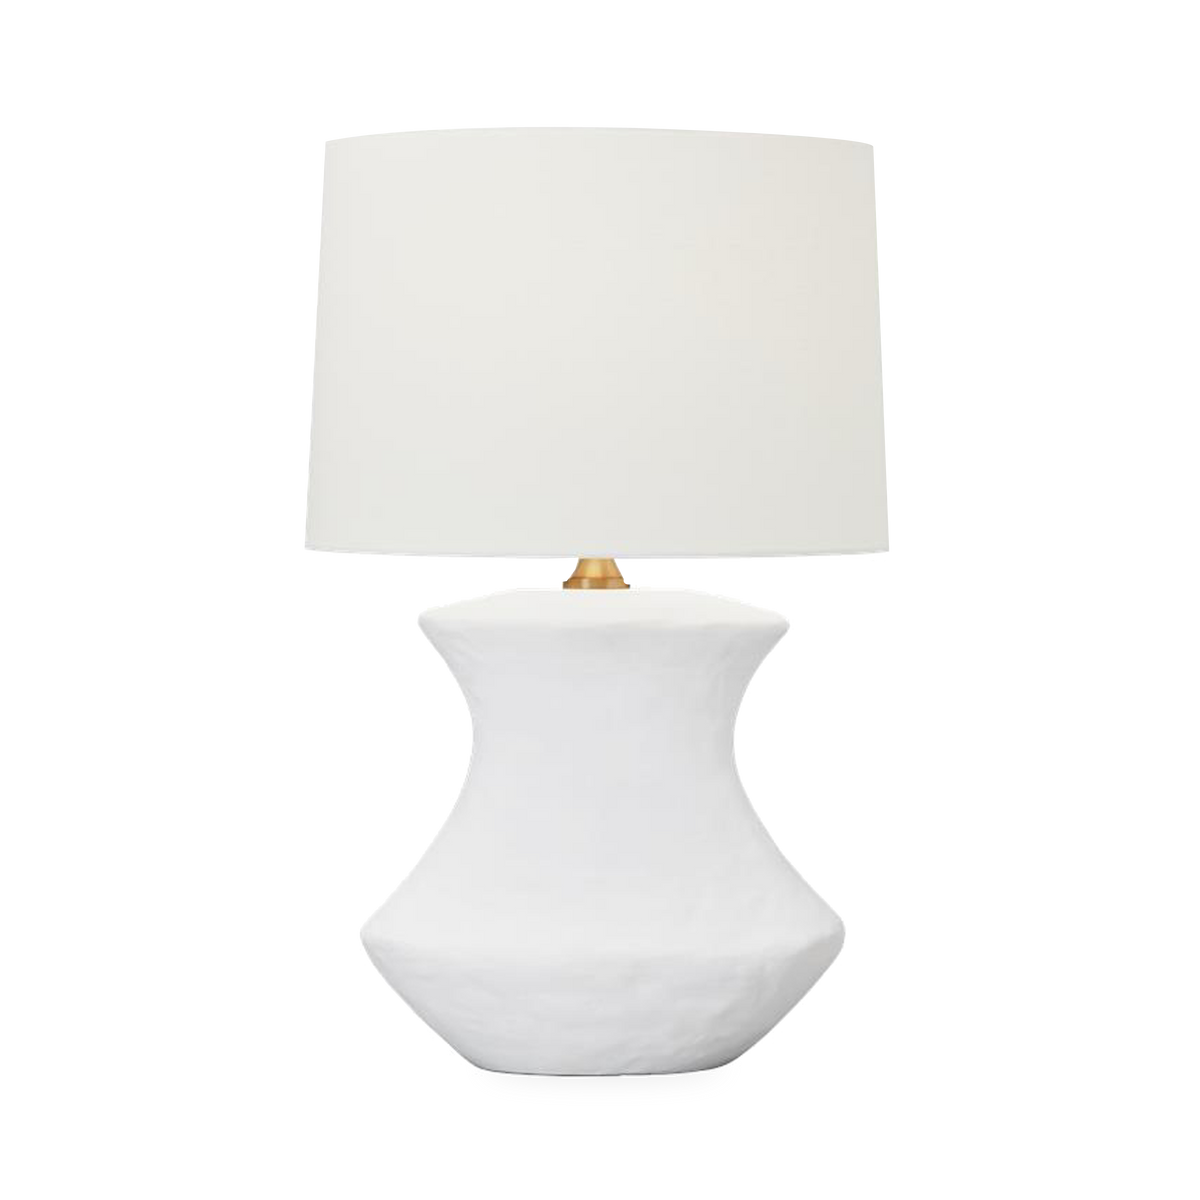 The Bone Table Lamp is crafted of ceramic with an organic form and matte glaze.